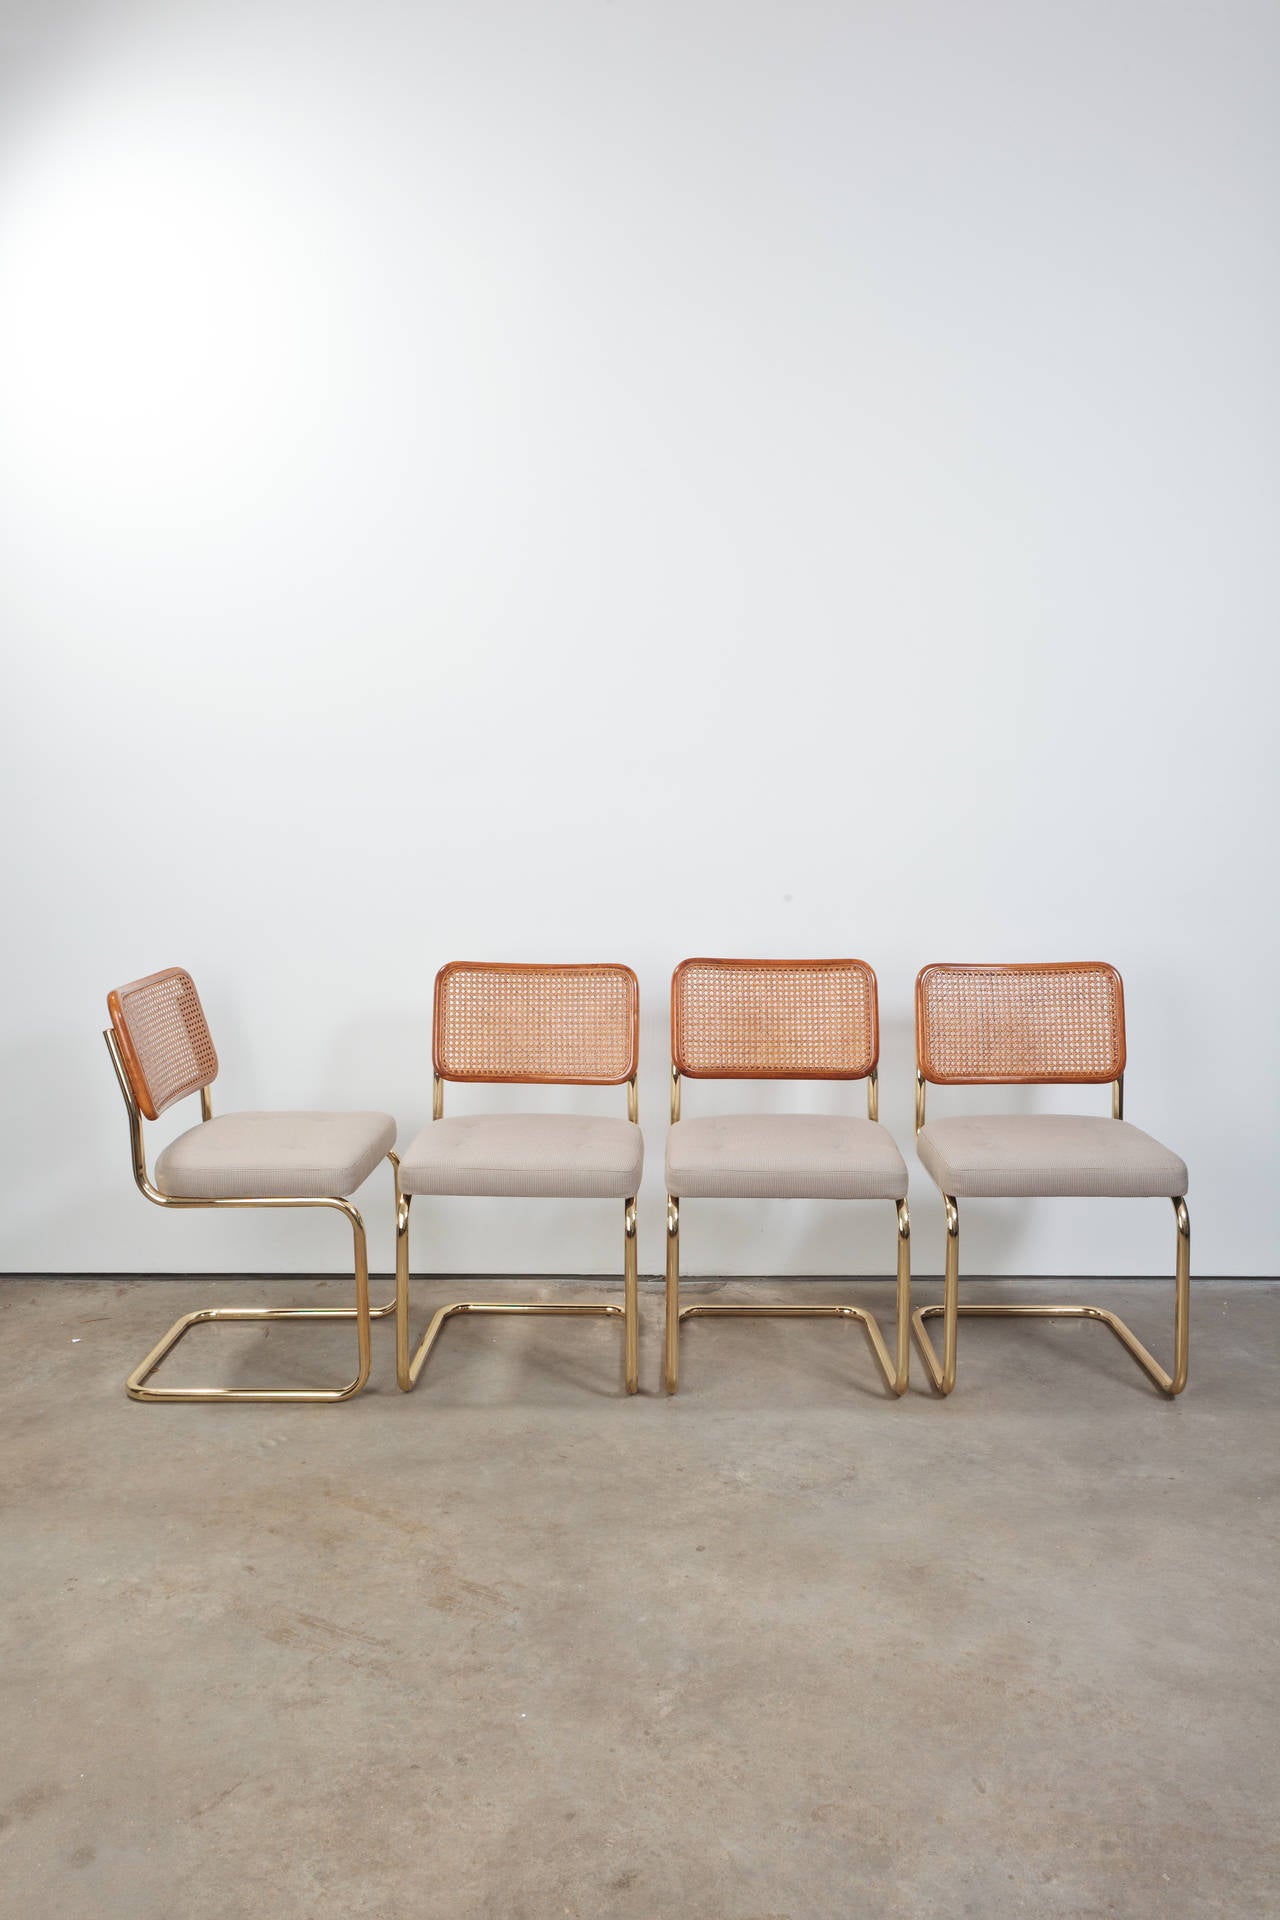 Marcel Breuer Cesca style chairs with upholstered seats and brass frame, in excellent condition and newly upholstered.